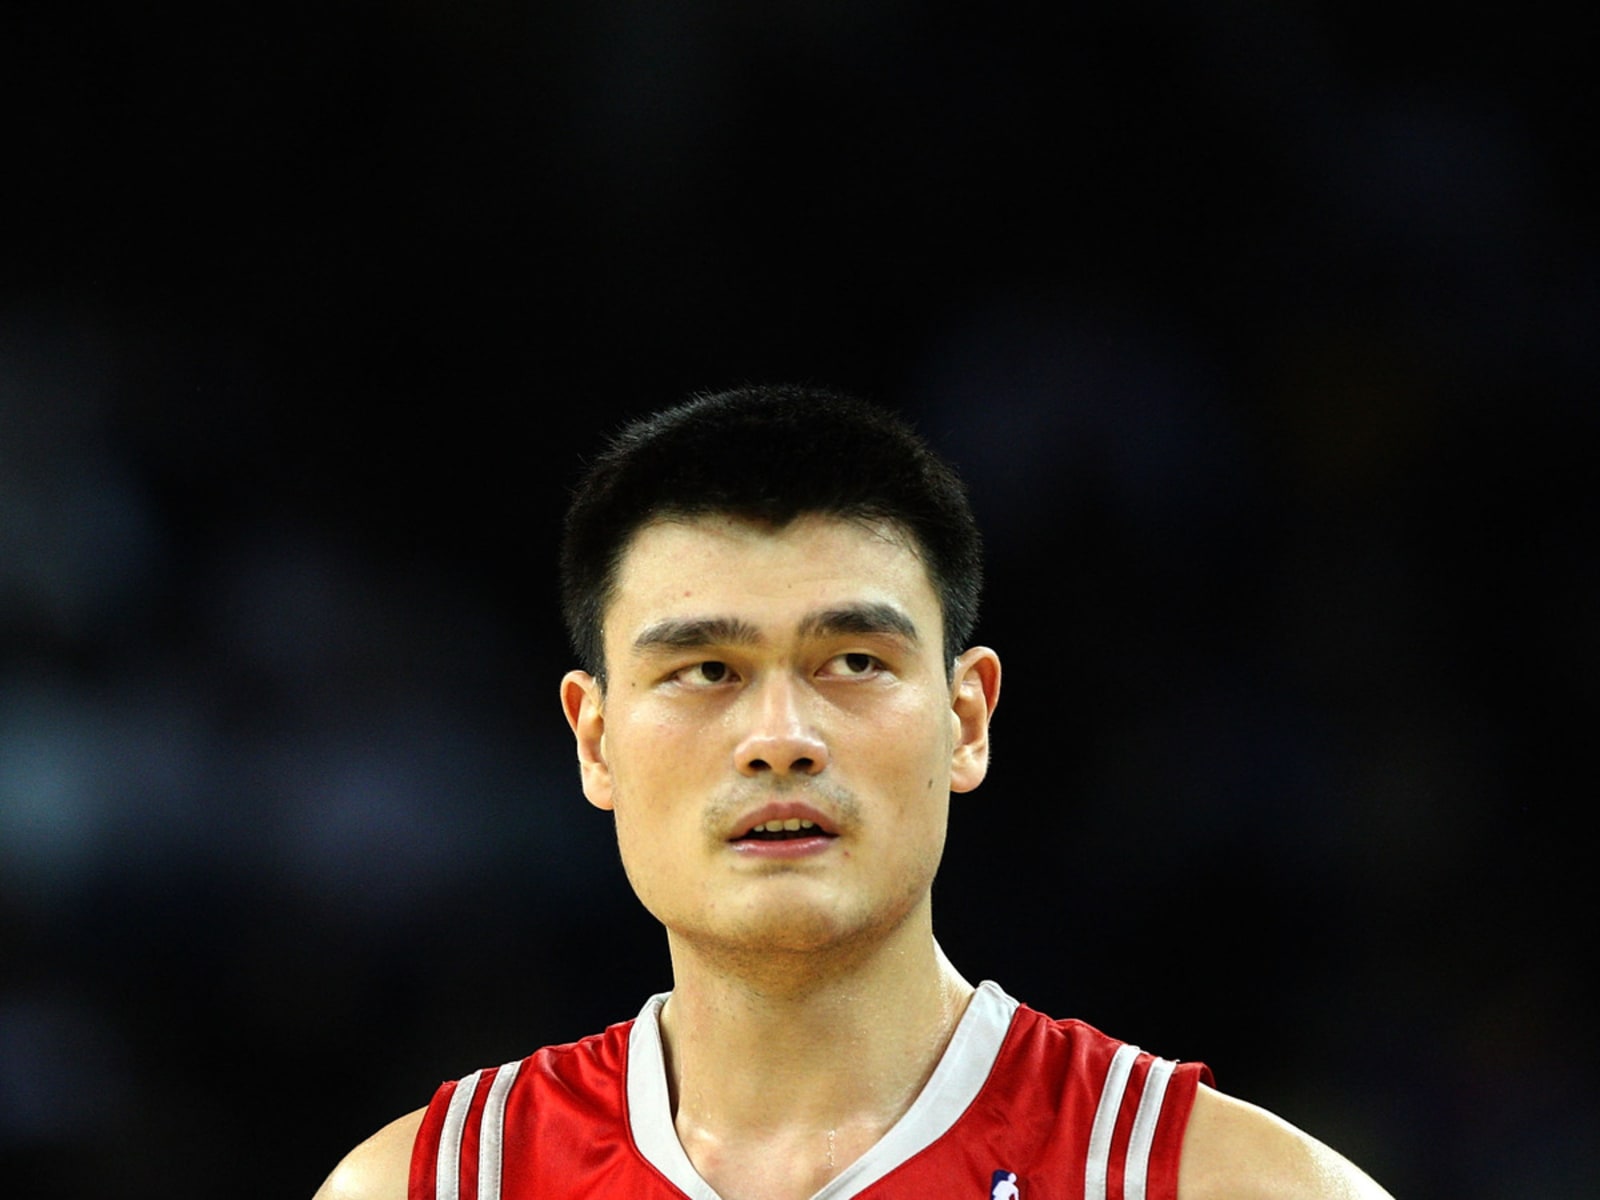 Yao Ming was too shy to tell people he should be called 'Ming